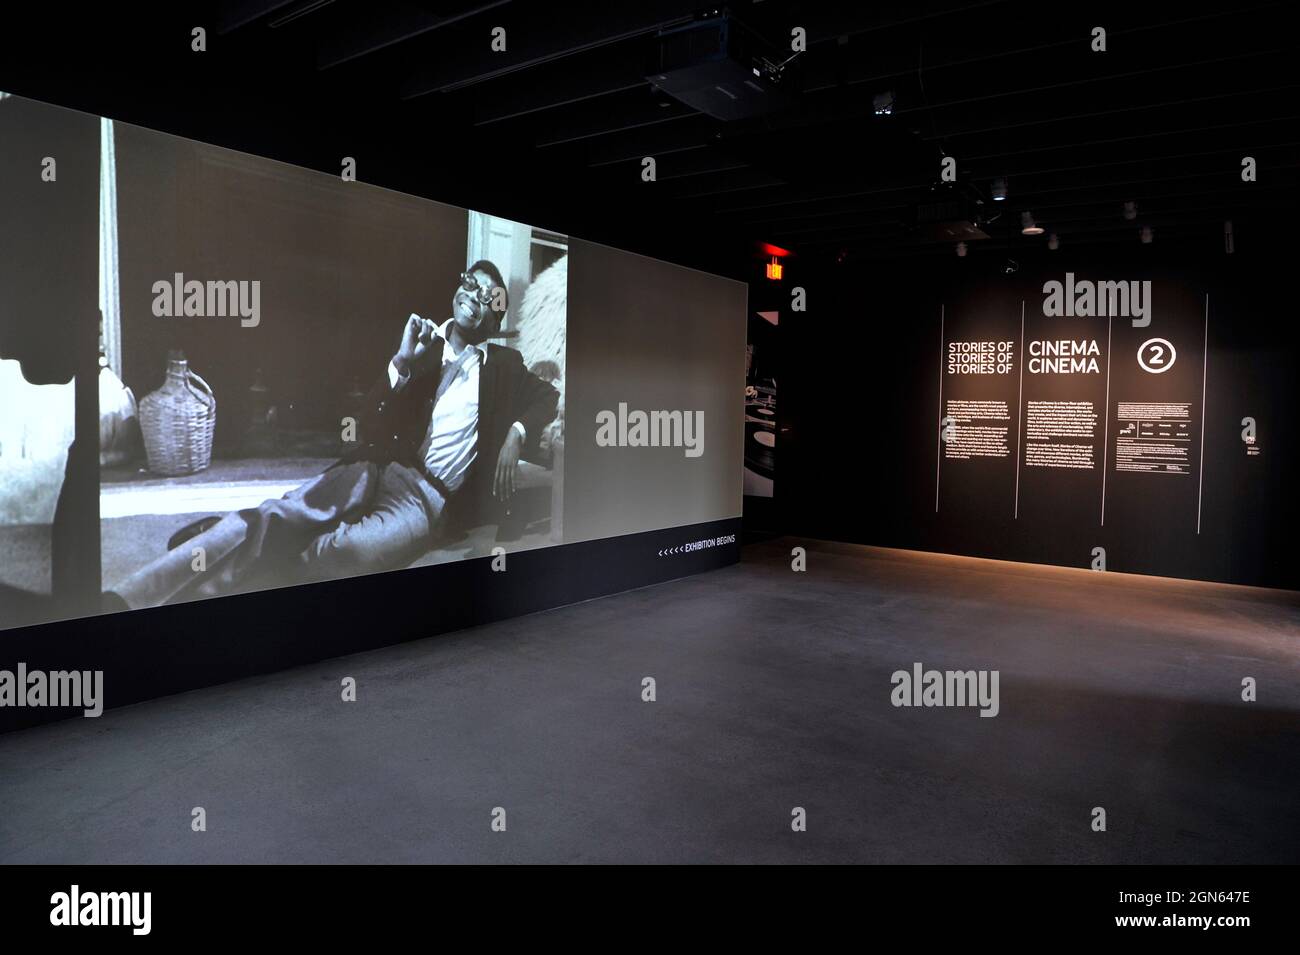 Film projected on a screen at entry to exhibit at the Academy Museum of Motion Pictures in Los Angeles, California Stock Photo